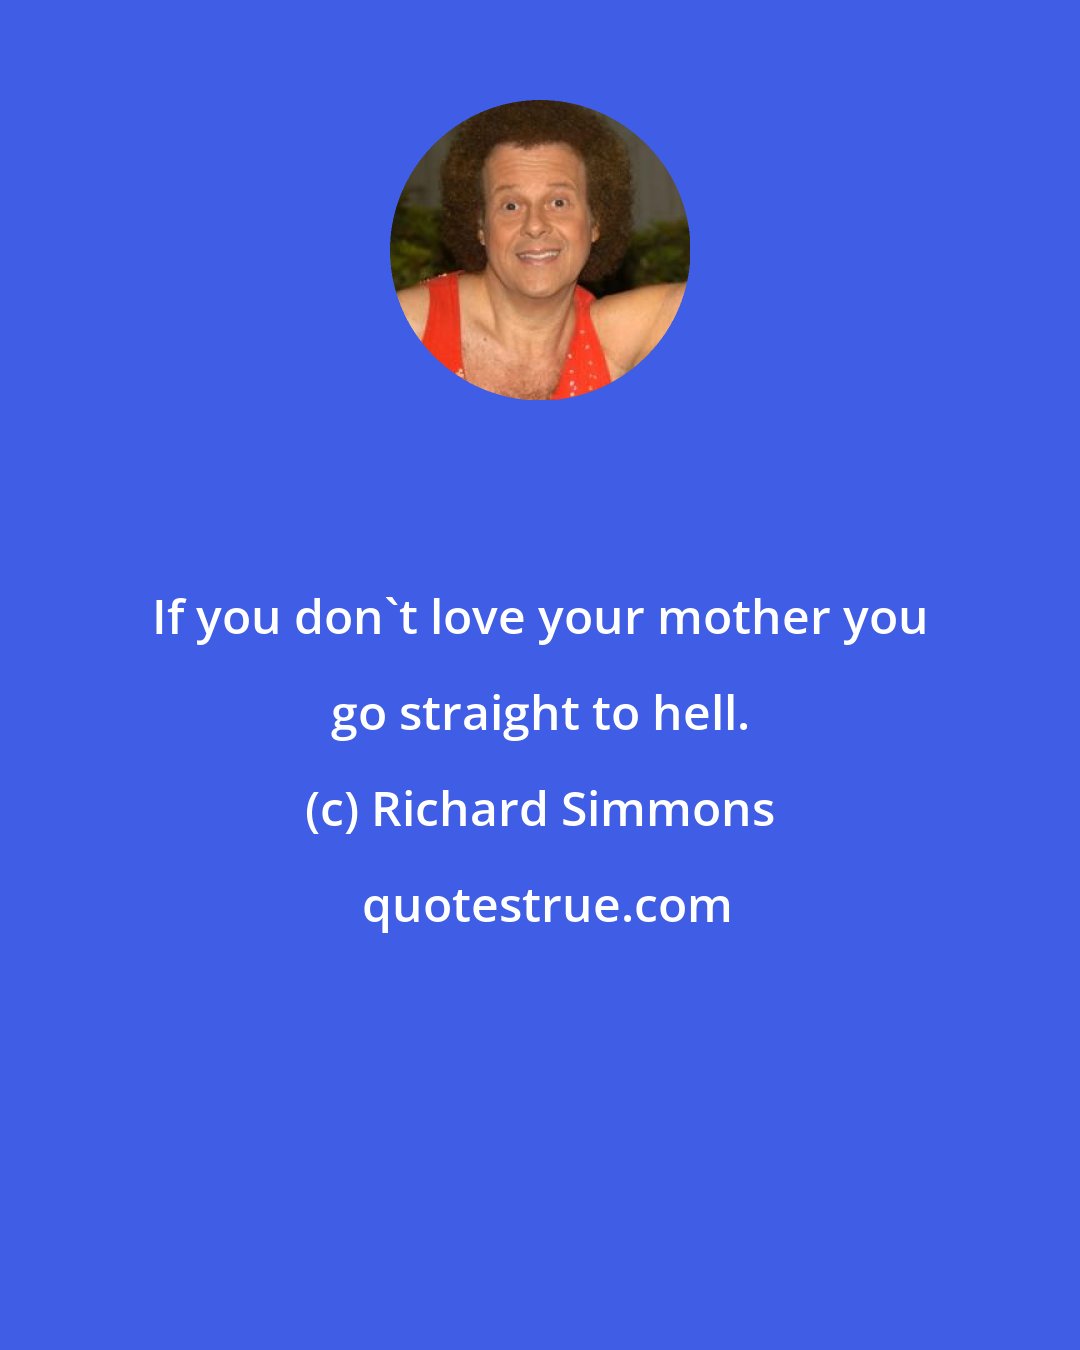 Richard Simmons: If you don't love your mother you go straight to hell.